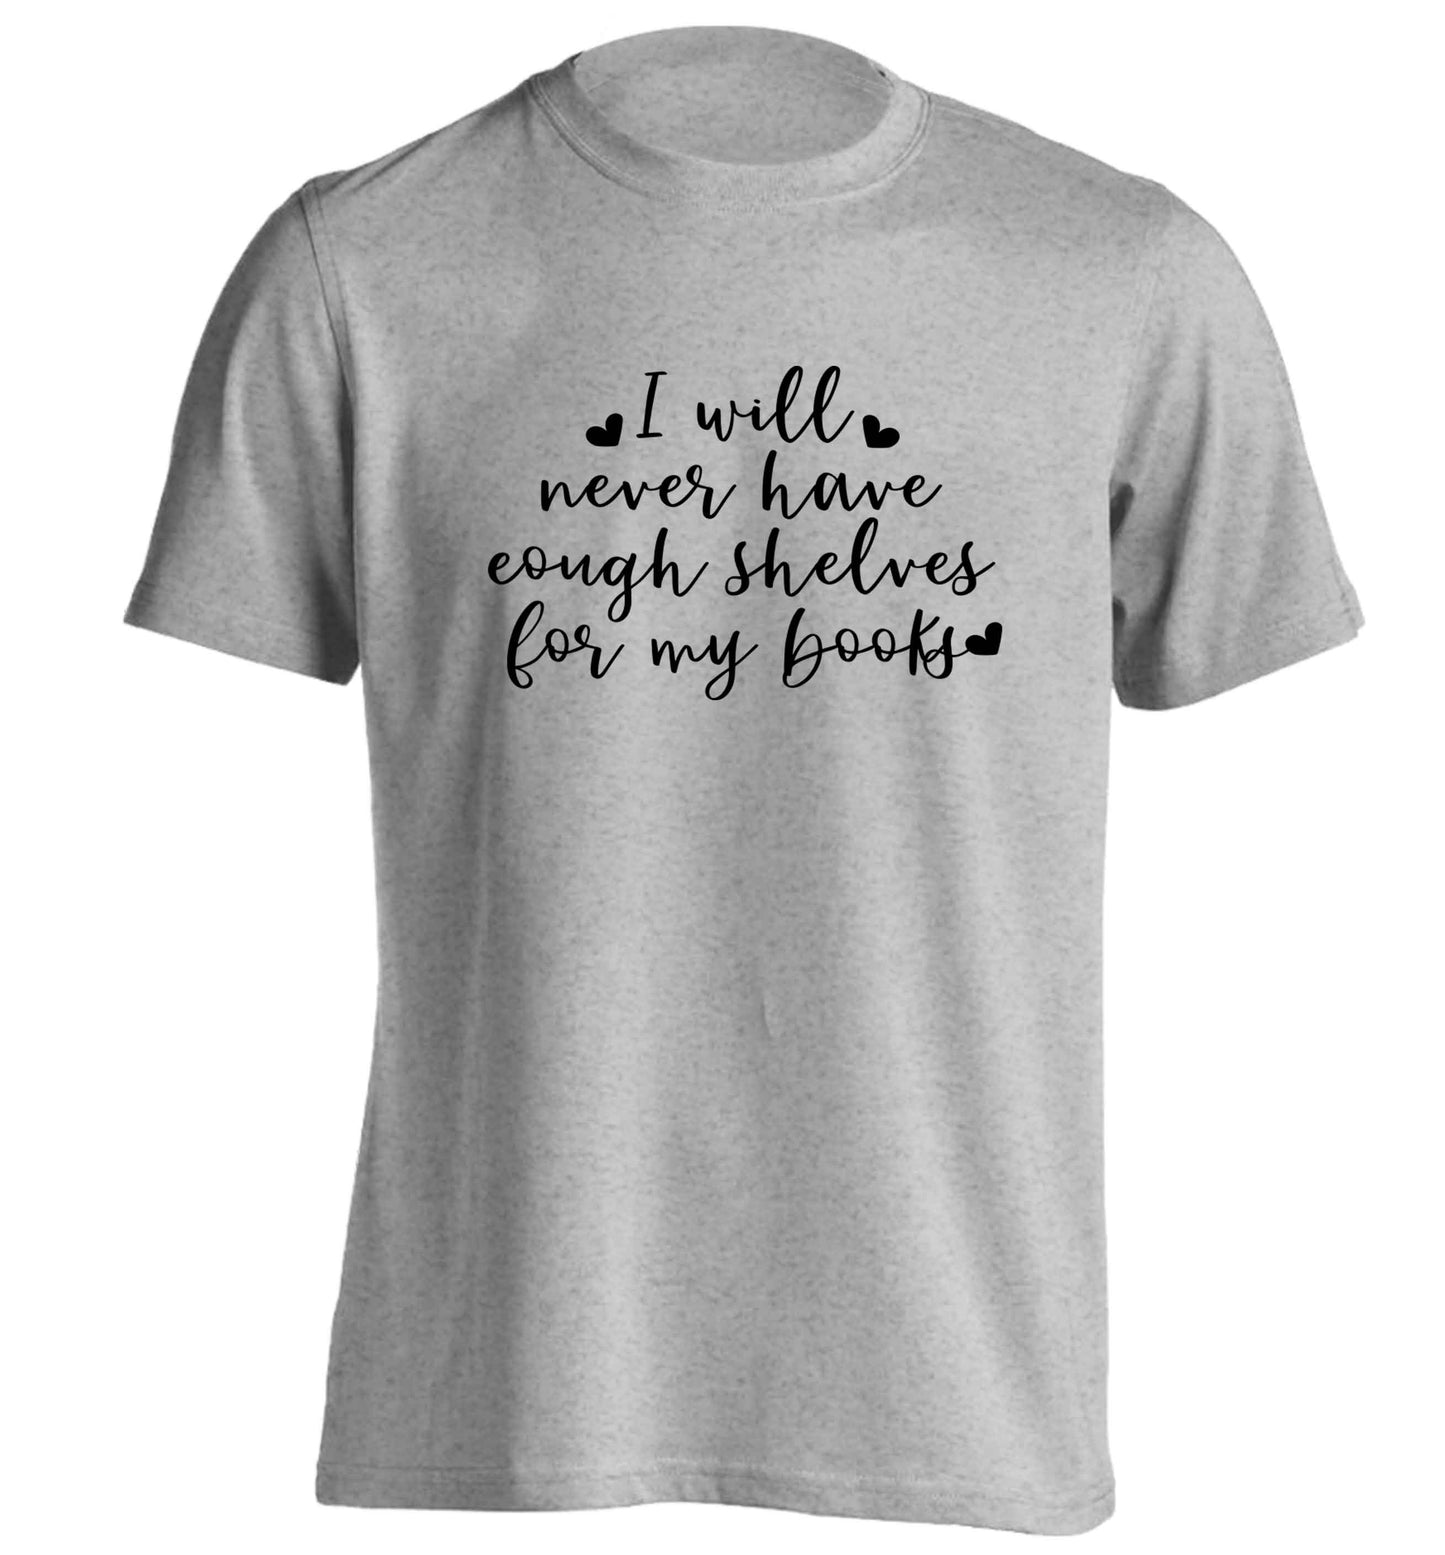 I will never have enough shelves for my books adults unisex grey Tshirt 2XL